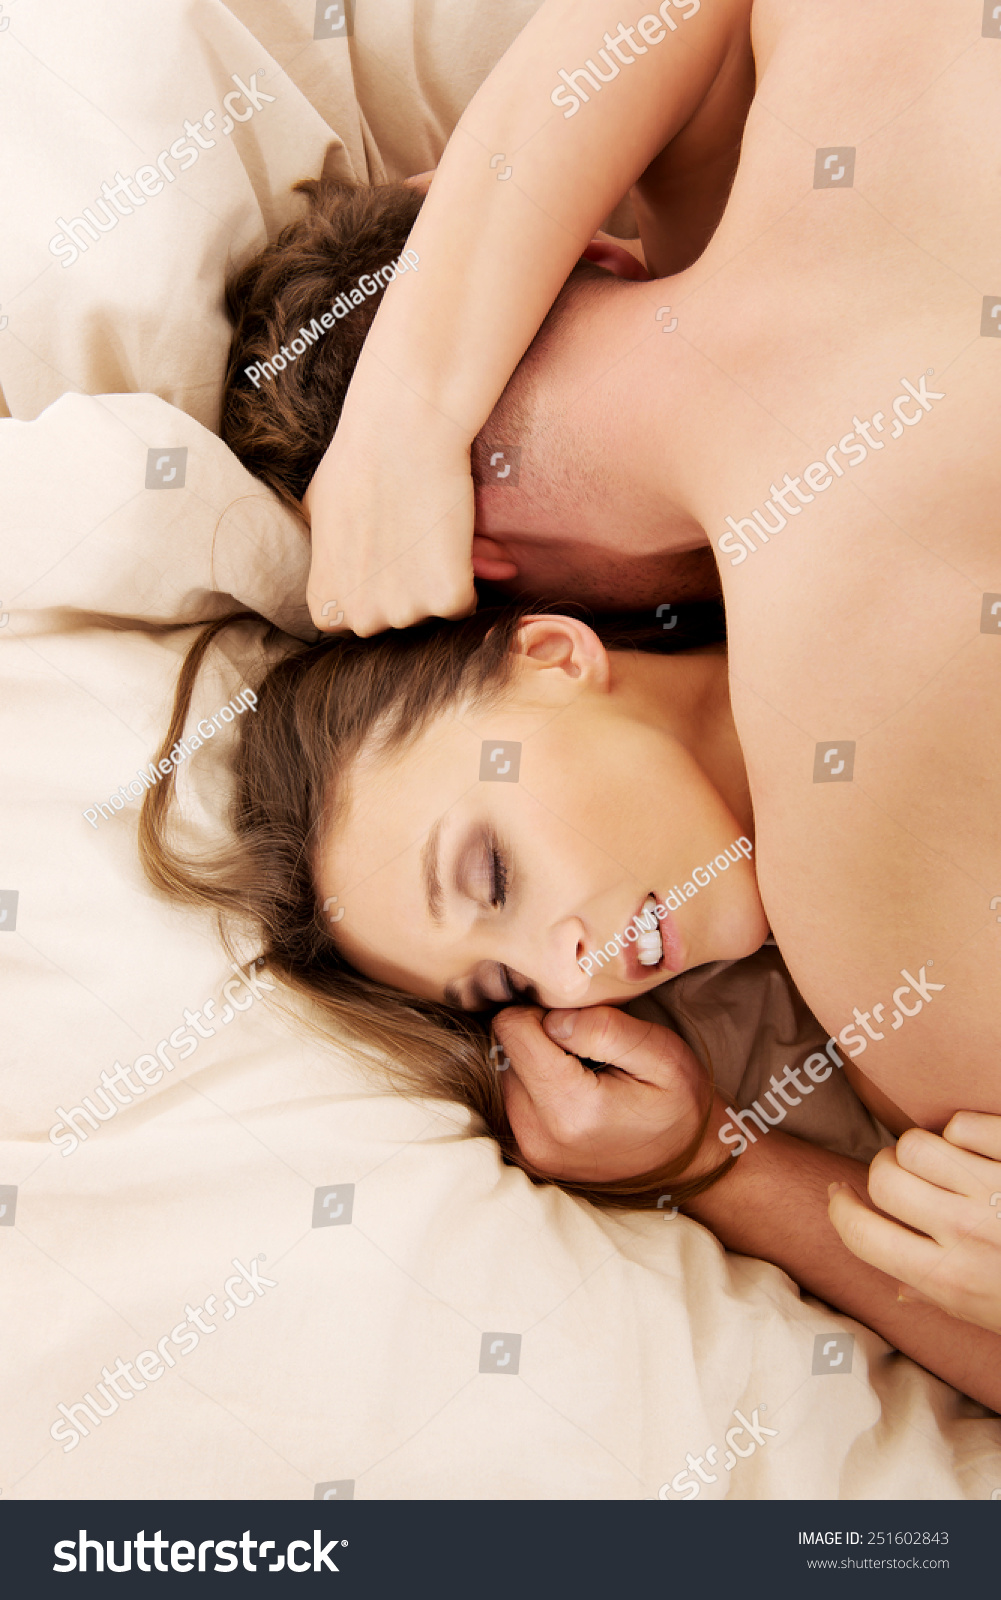 Pictures Of Couples Having Sex